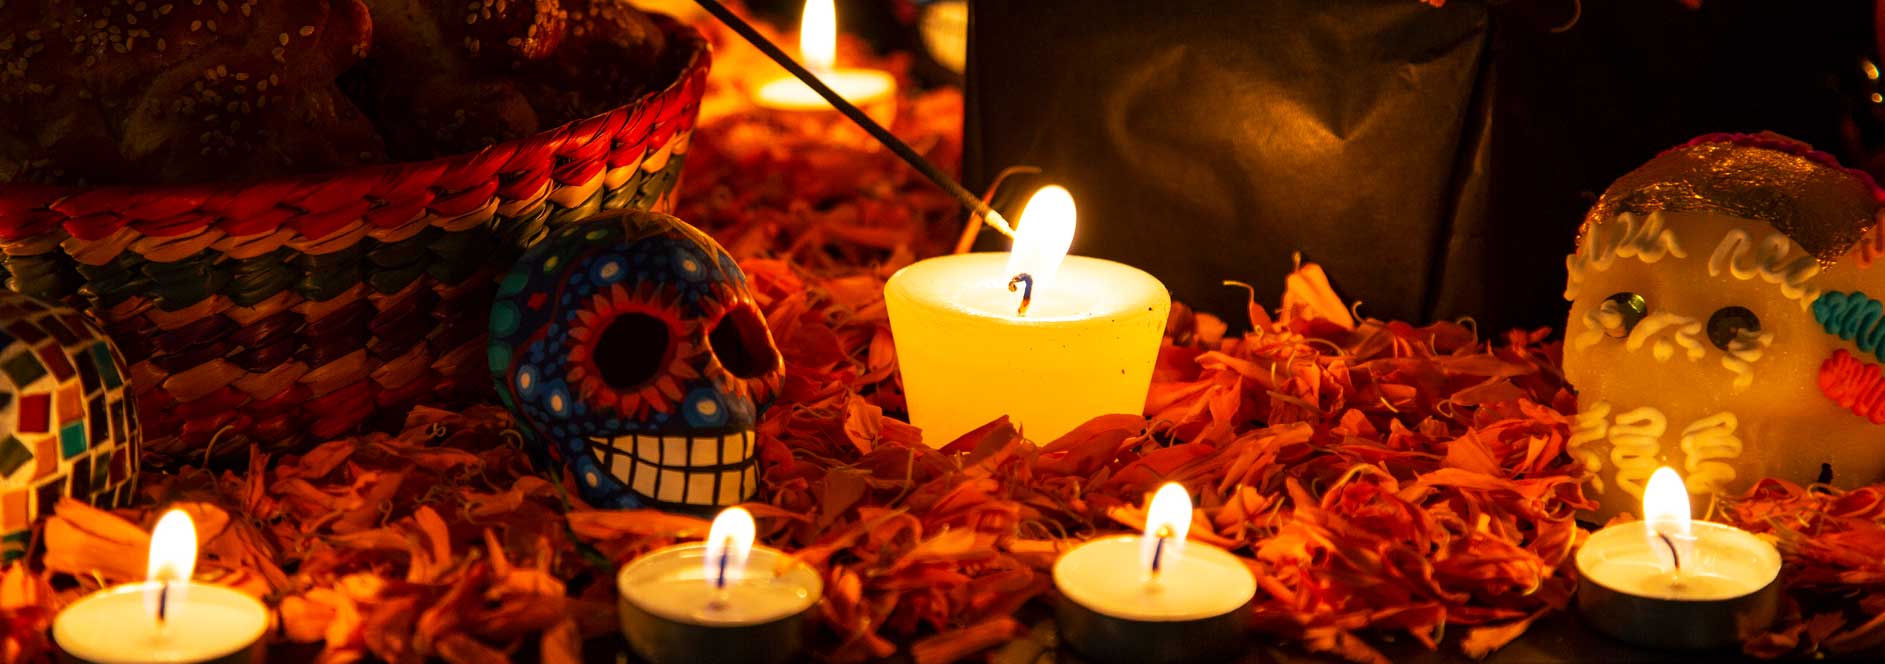 candles being lit on an ofrenda for Day of the Dead